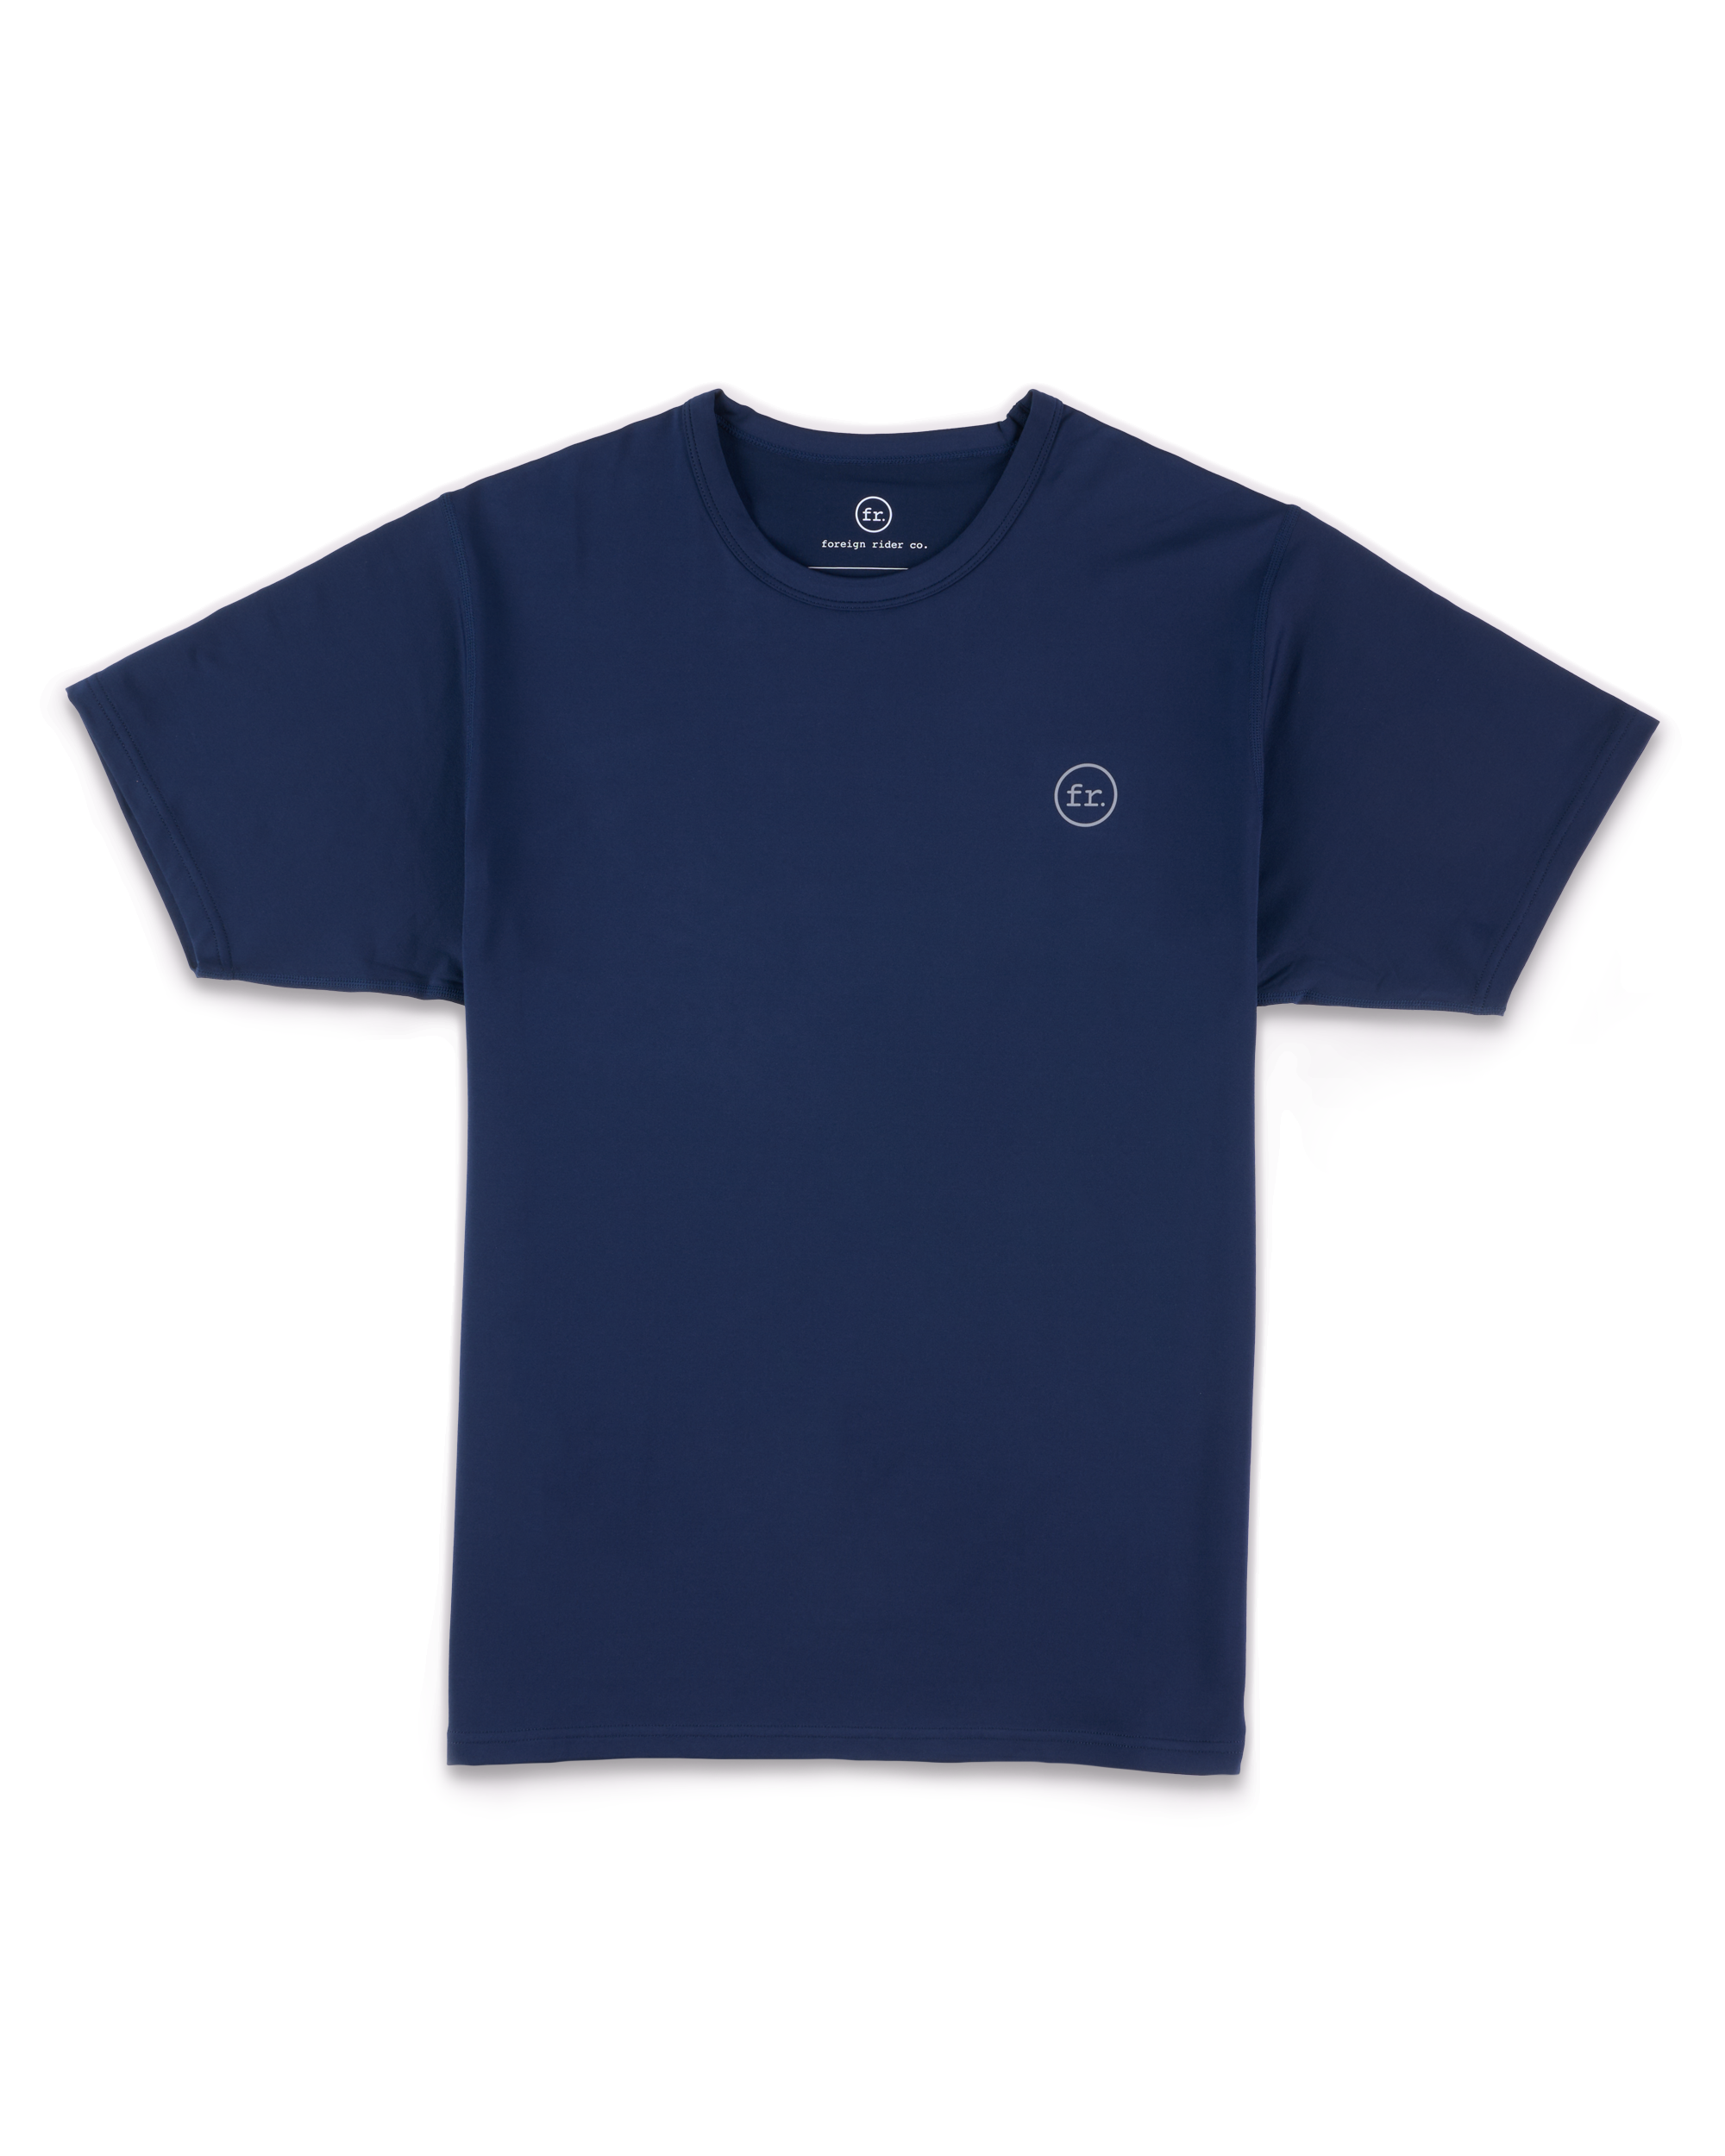 FR. Performance SS T-Shirt Navy - Foreign Rider Co.